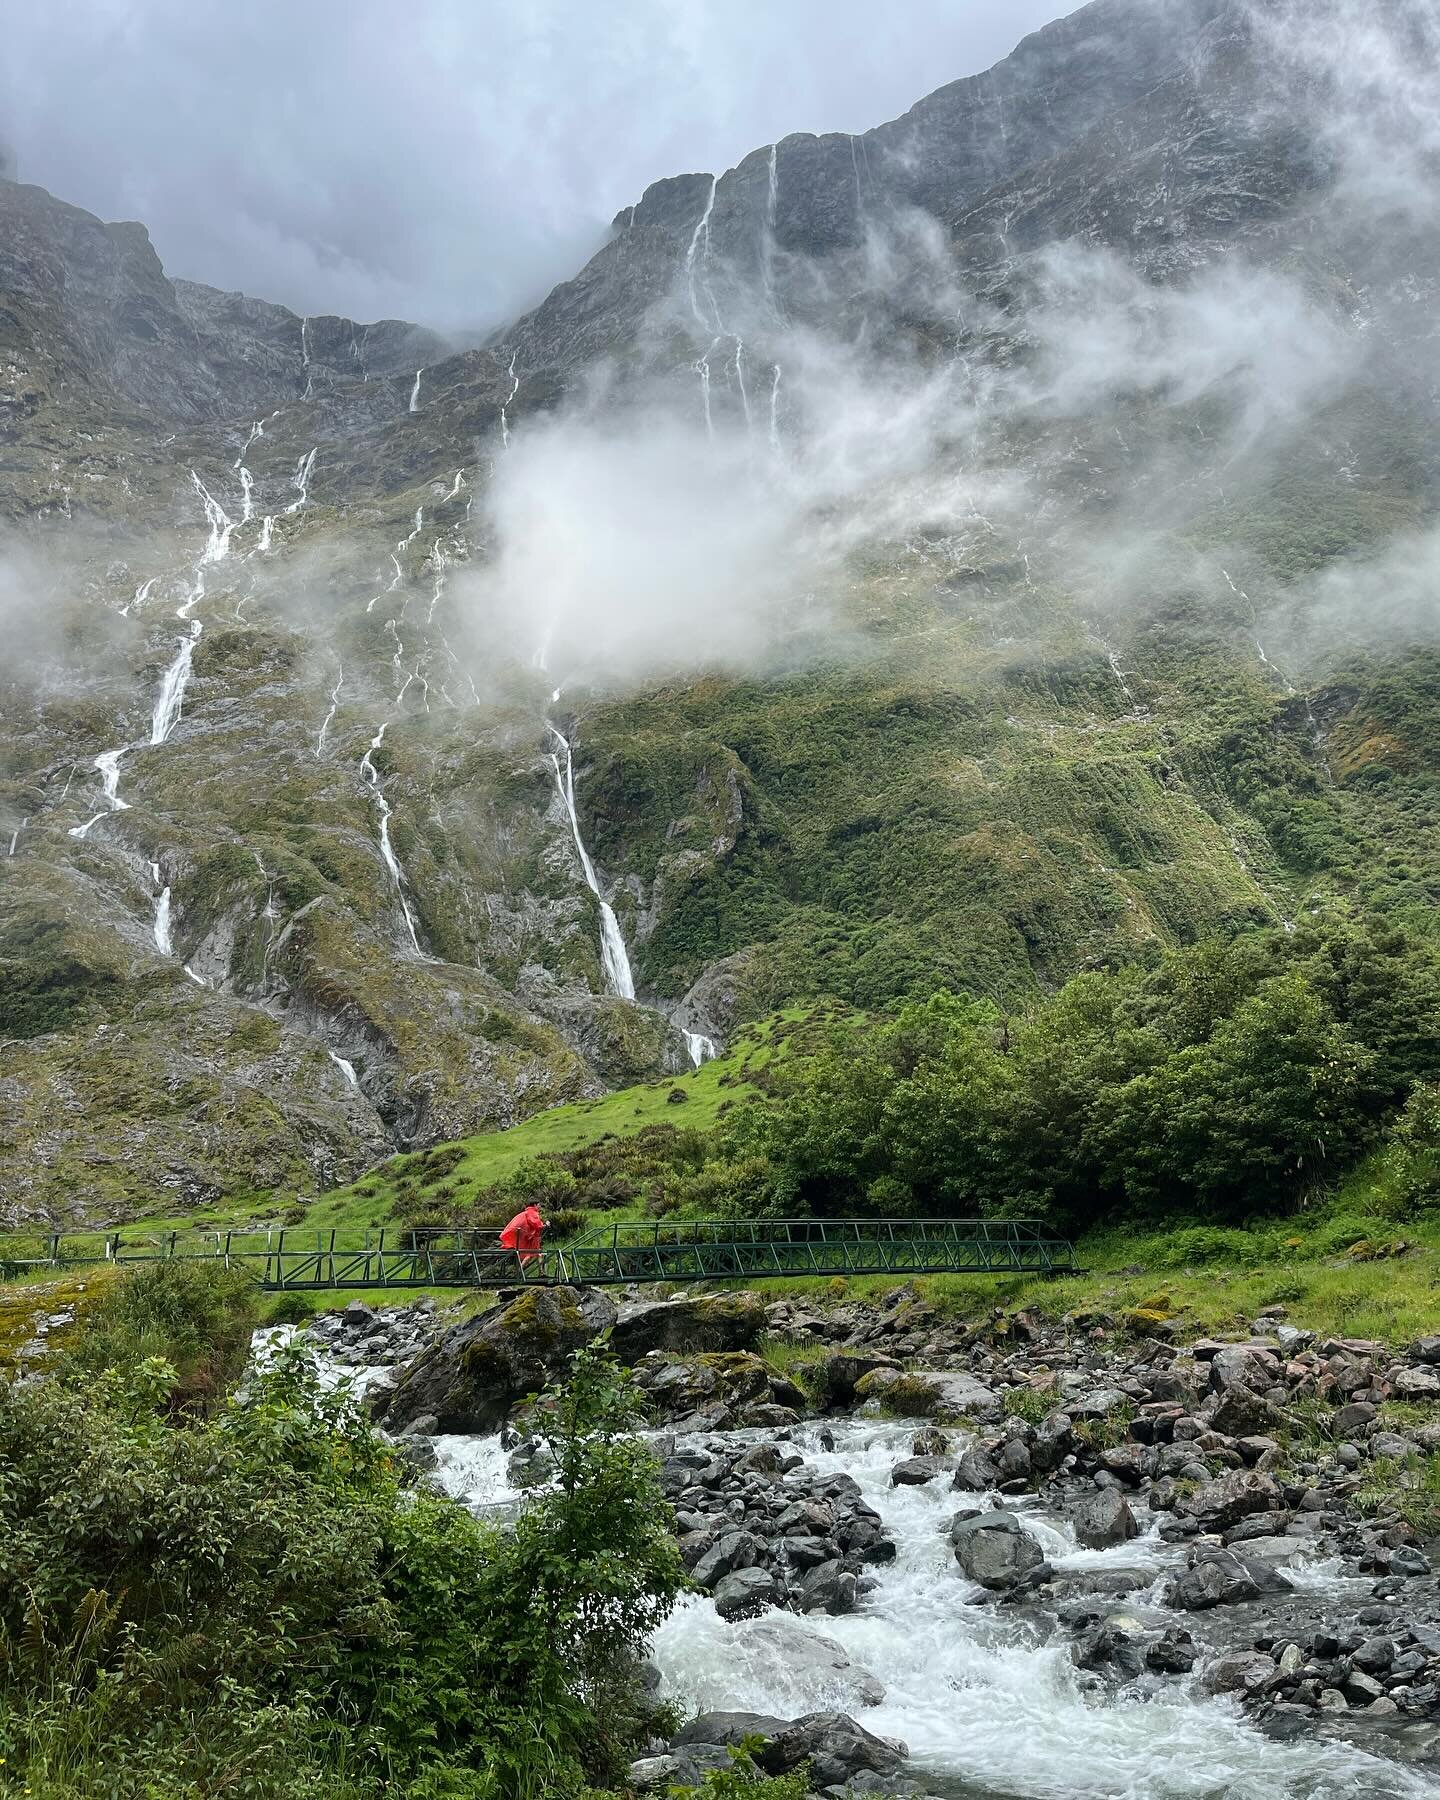 4 days of rain, fog, sun, and sandflies on the Milford track. The Milford track starts at one end of Lake Te Anau and ends at Milford Sound.

We started Milford the day after finishing Kepler. Milford and Kepler are both Fiordland National Park Great